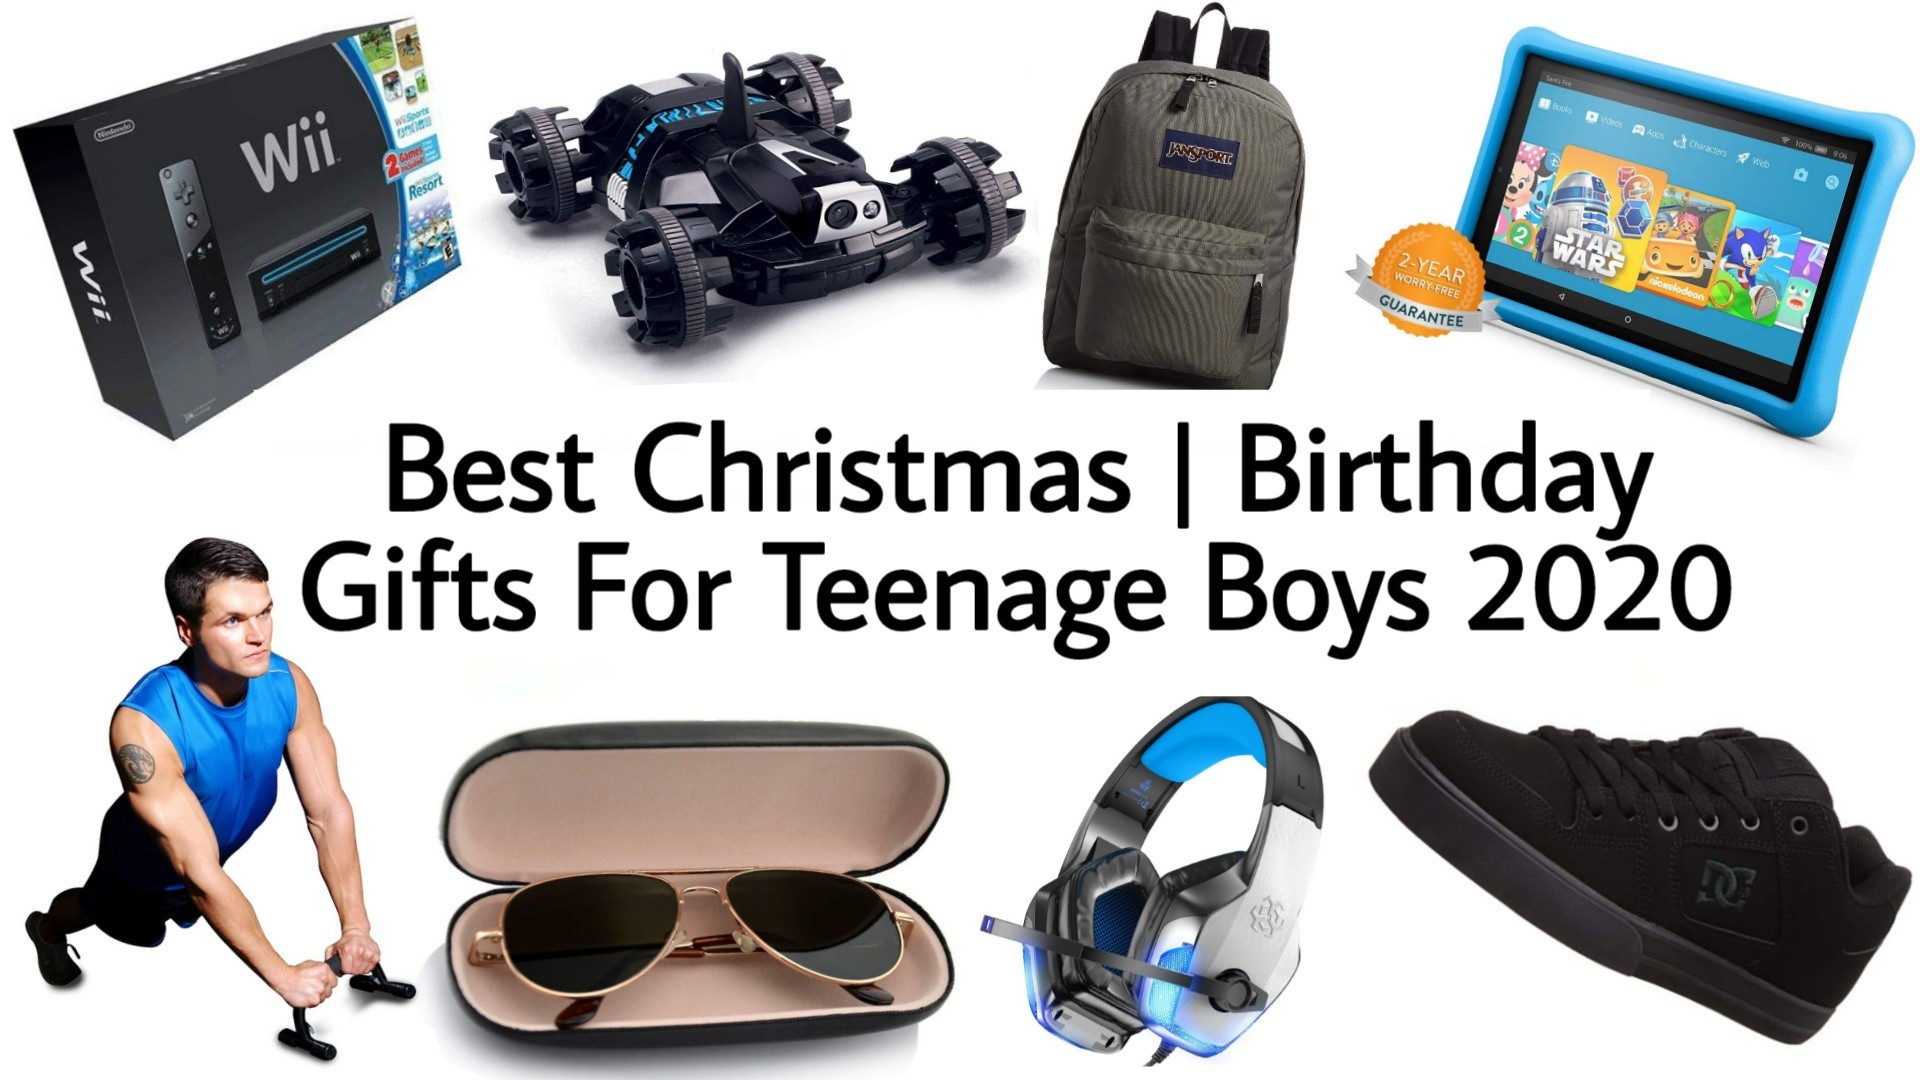 Xmas Gift Ideas For Boys
 Best Christmas Gifts for Teenage Boys 2021